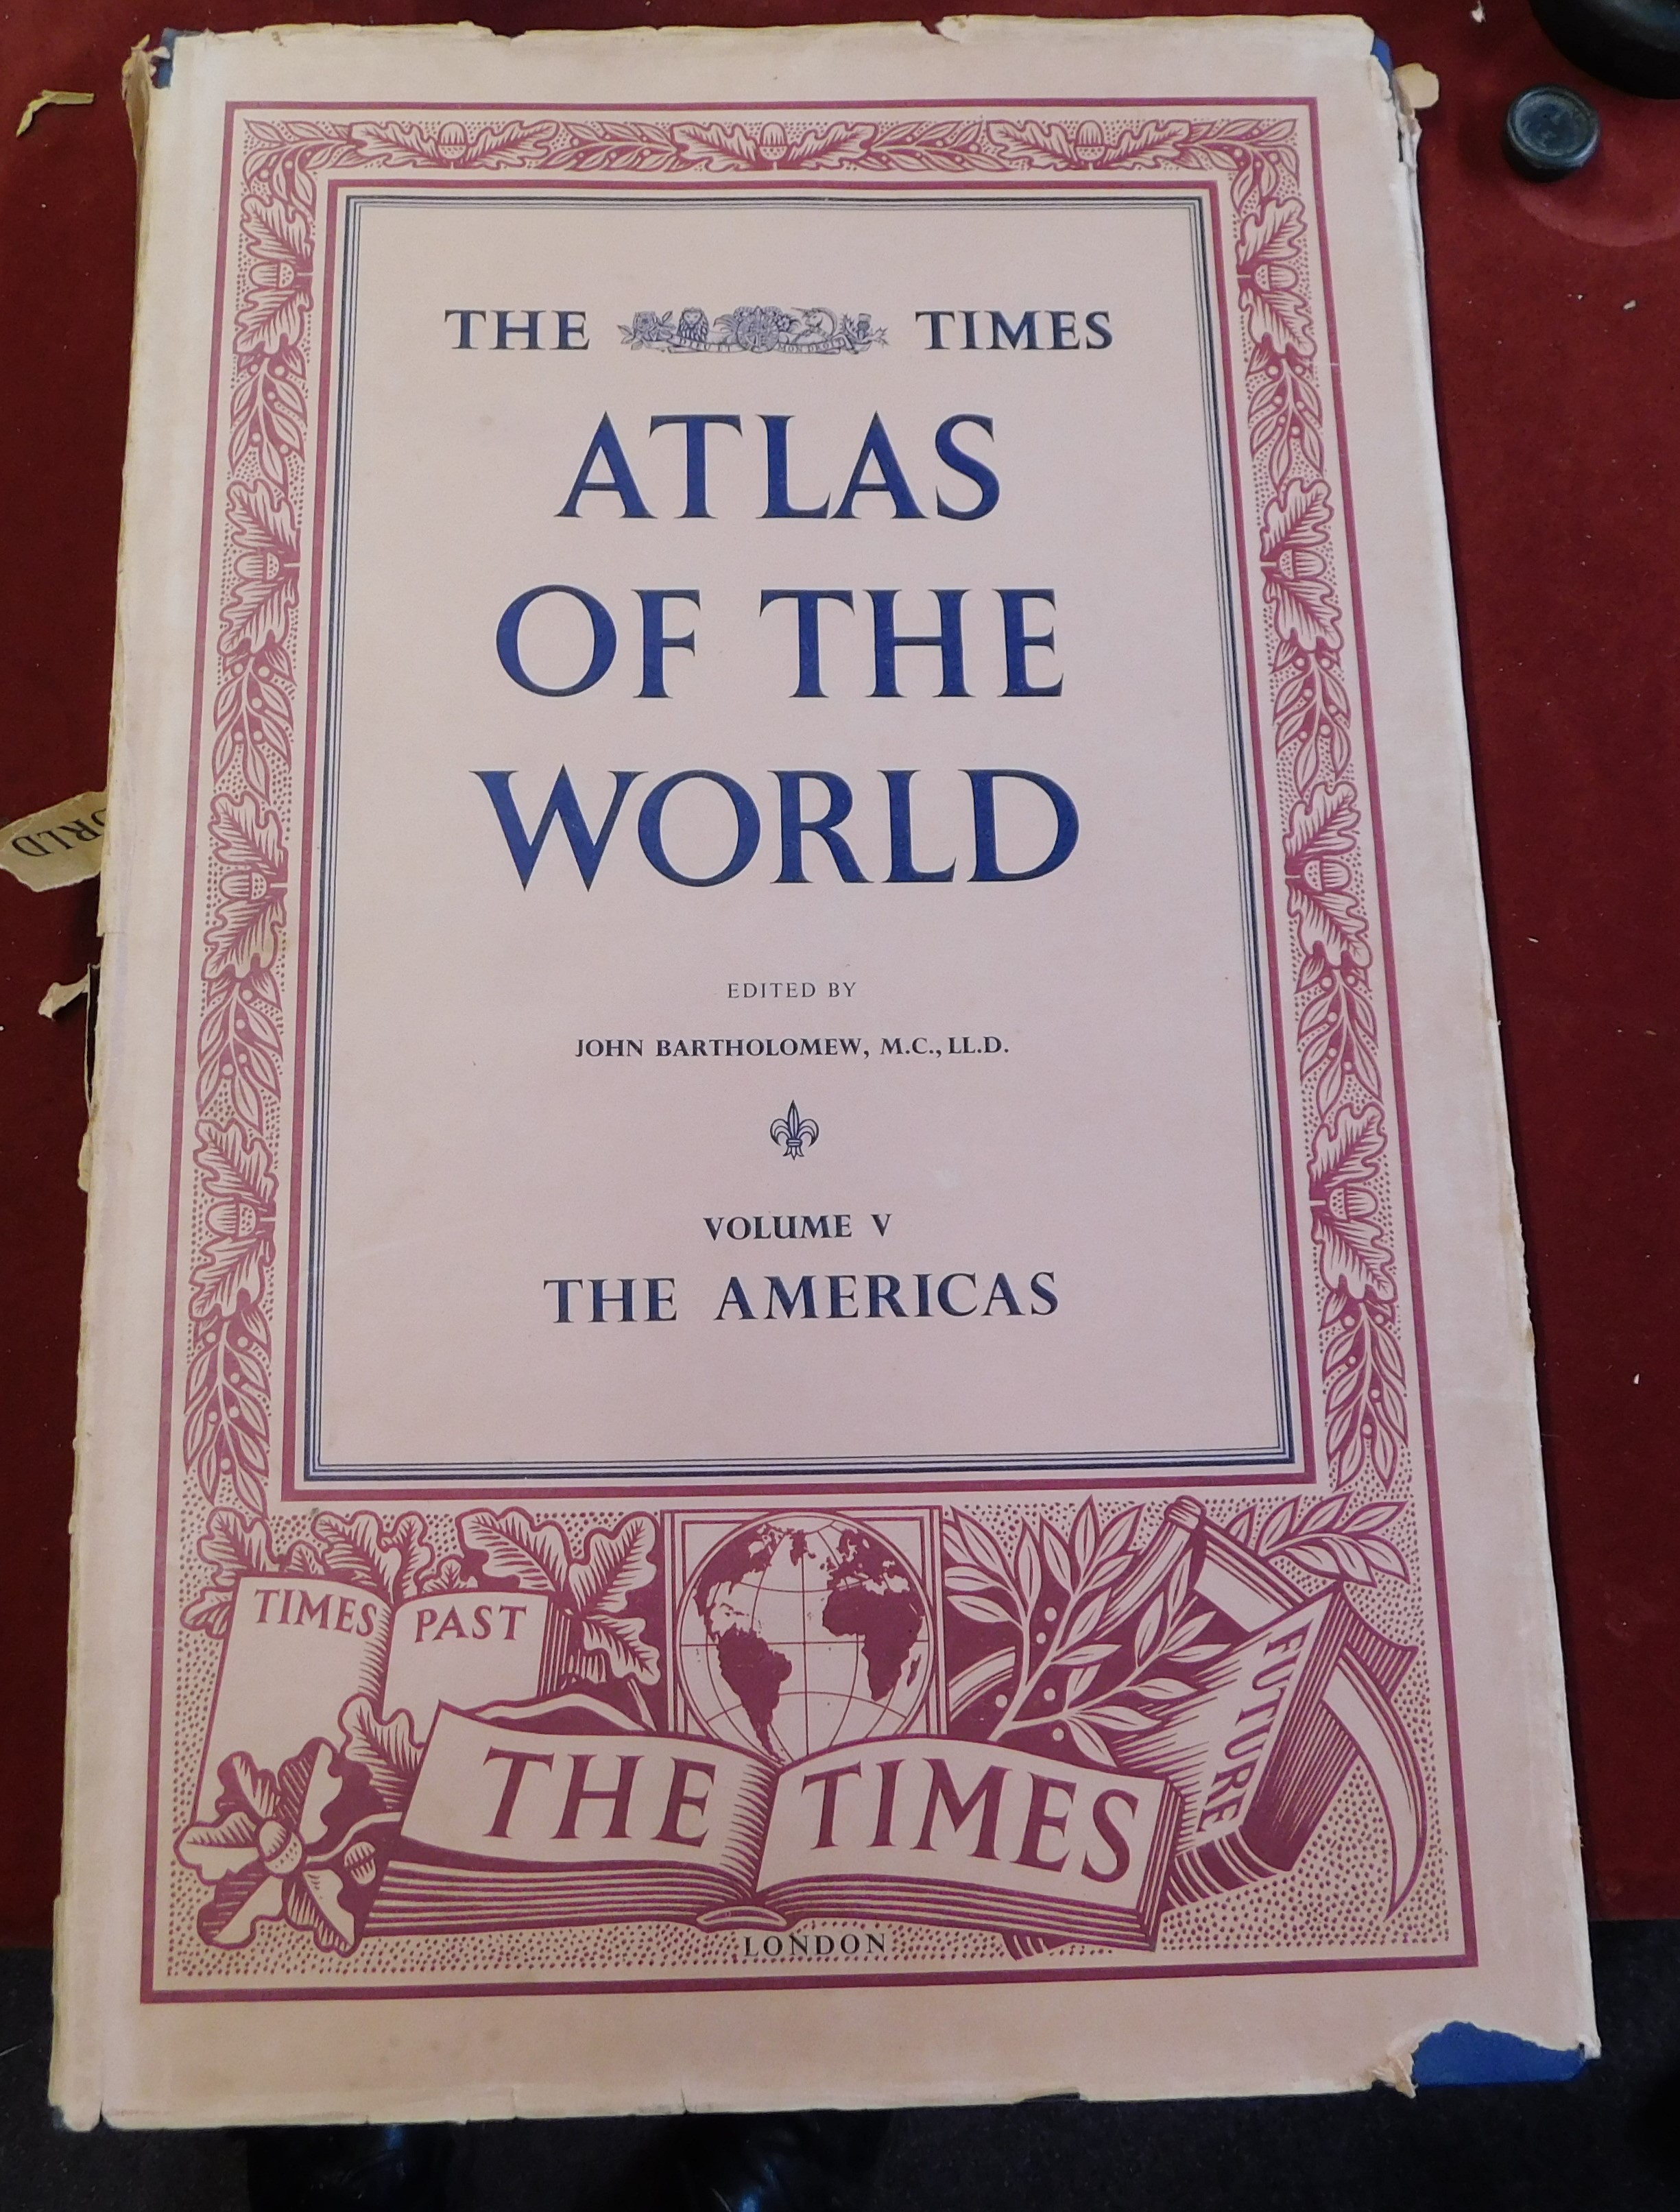 The Times Atlas of the World Volume V, 1955 depicting The Americas. Good condition with some wear to